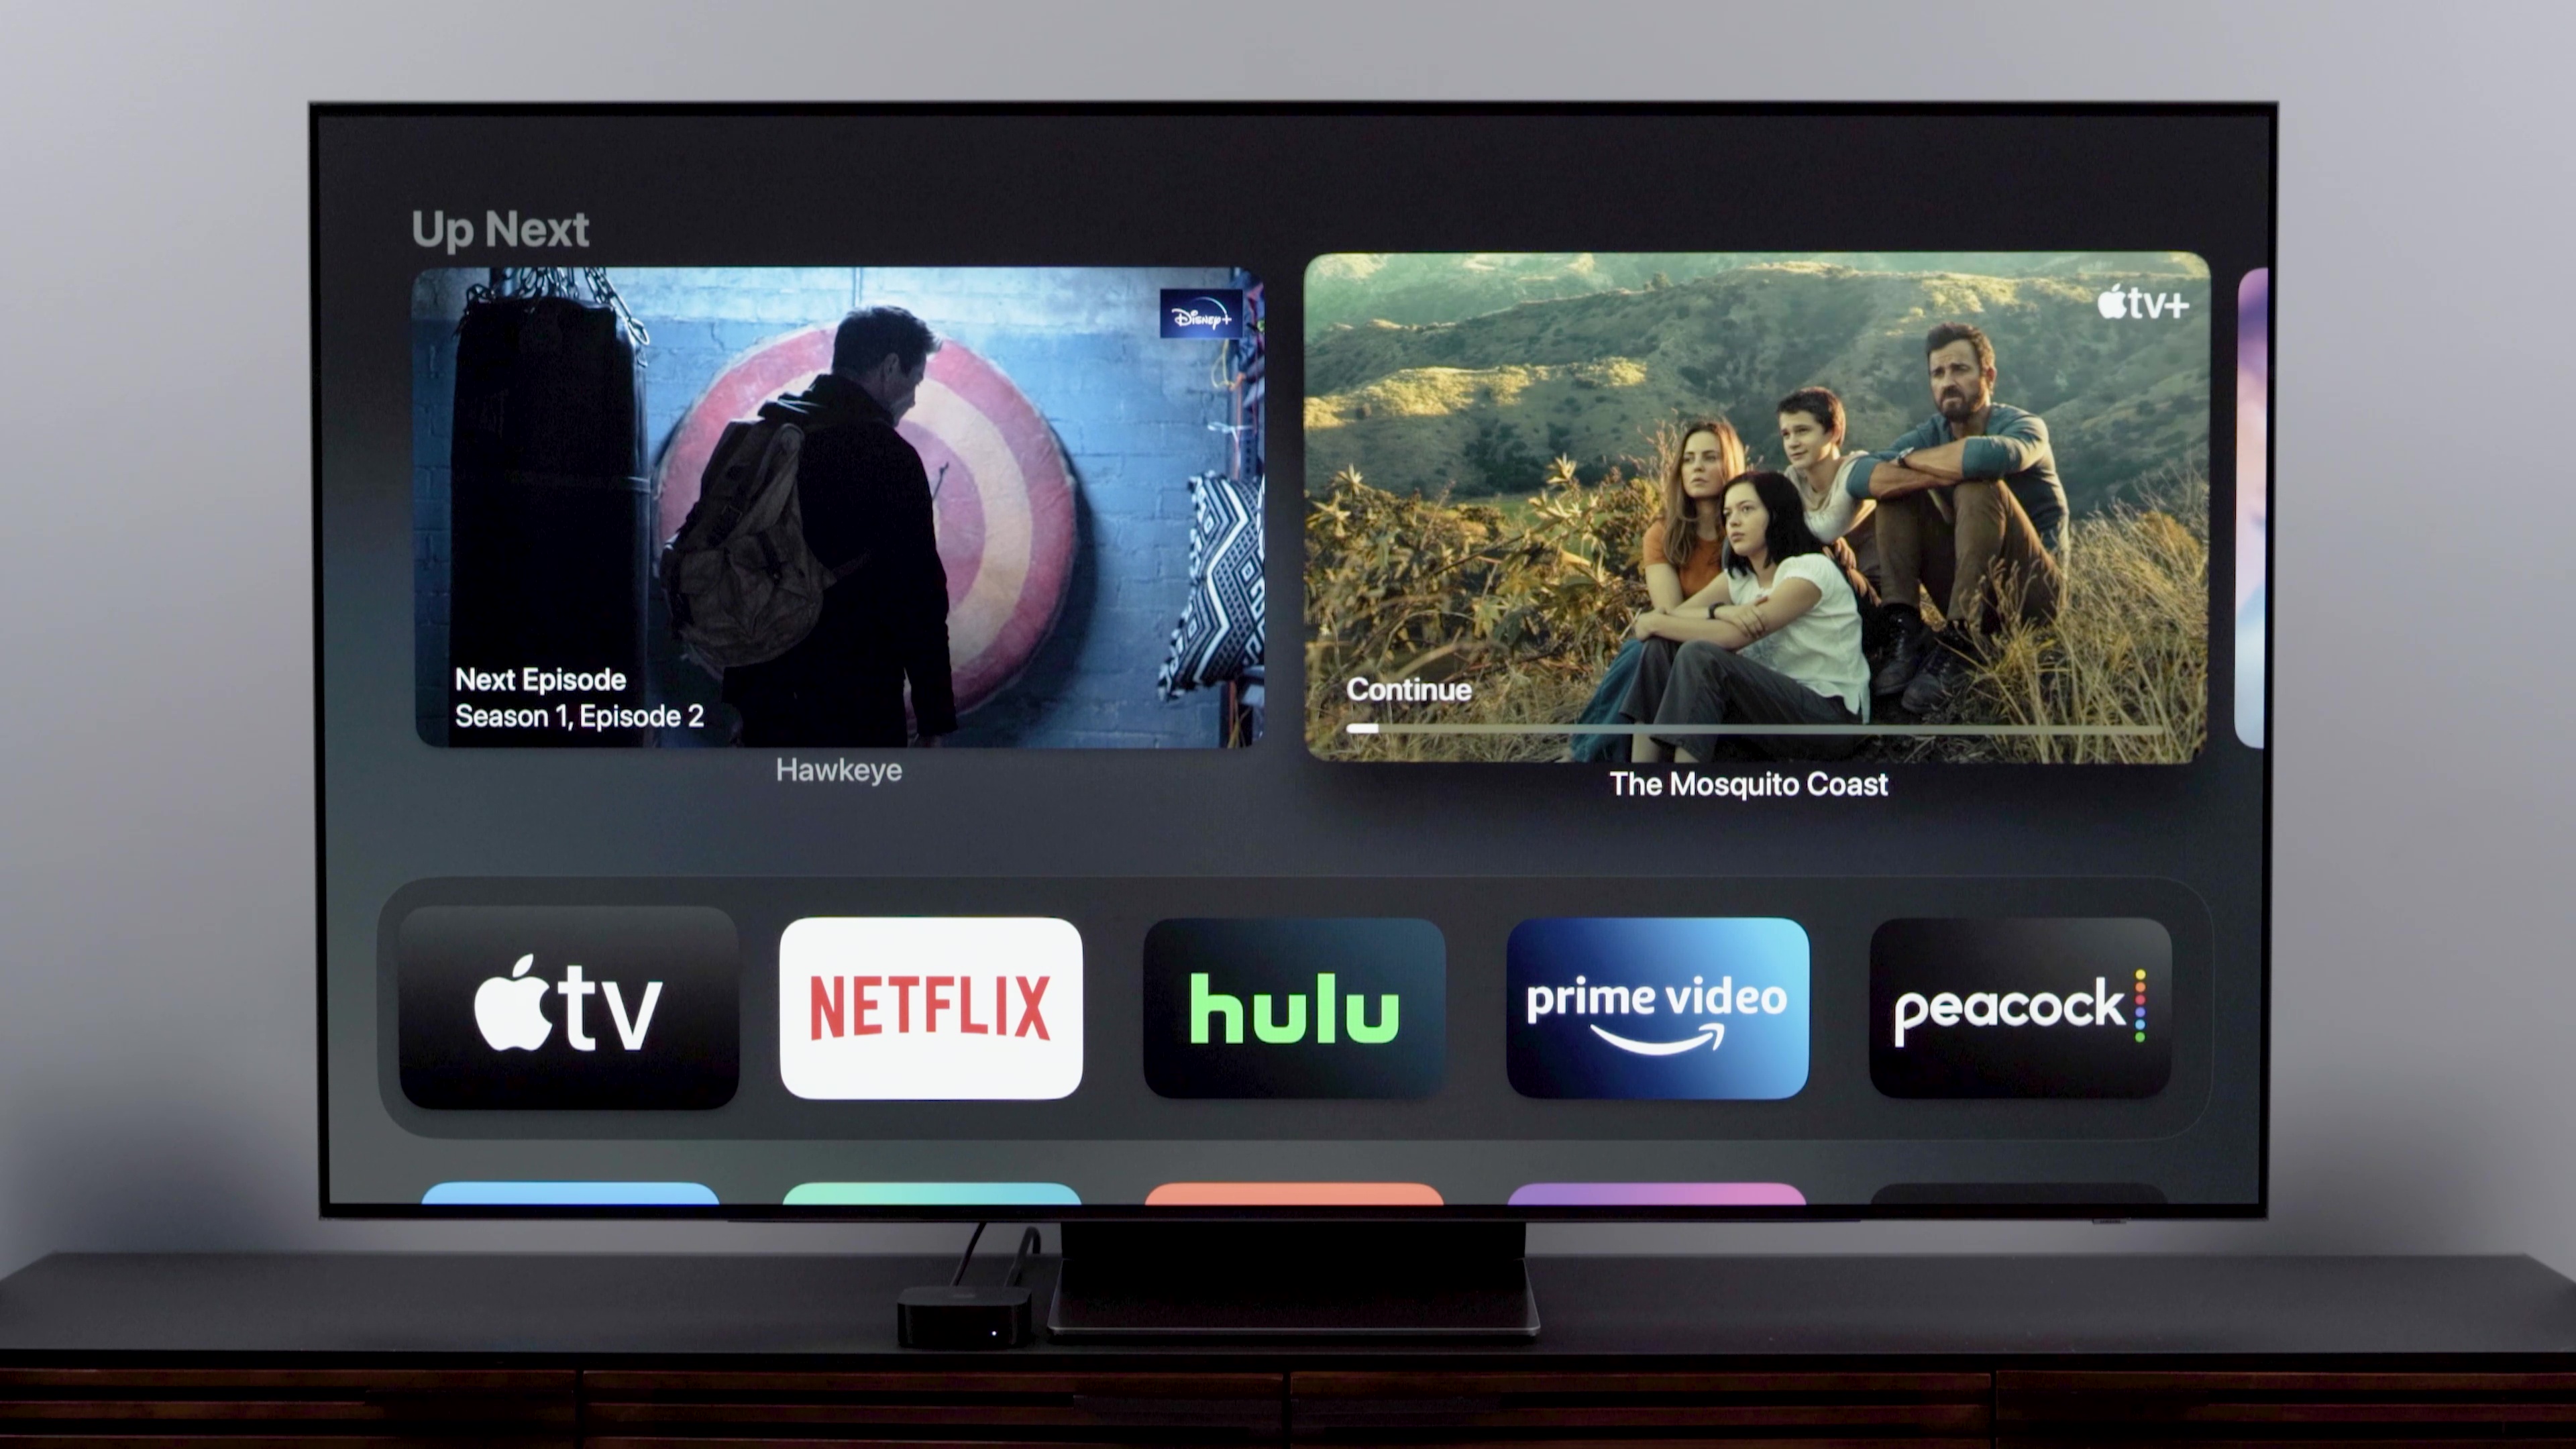 Apple TV homescreen customized to show "up next" river instead of suggested content